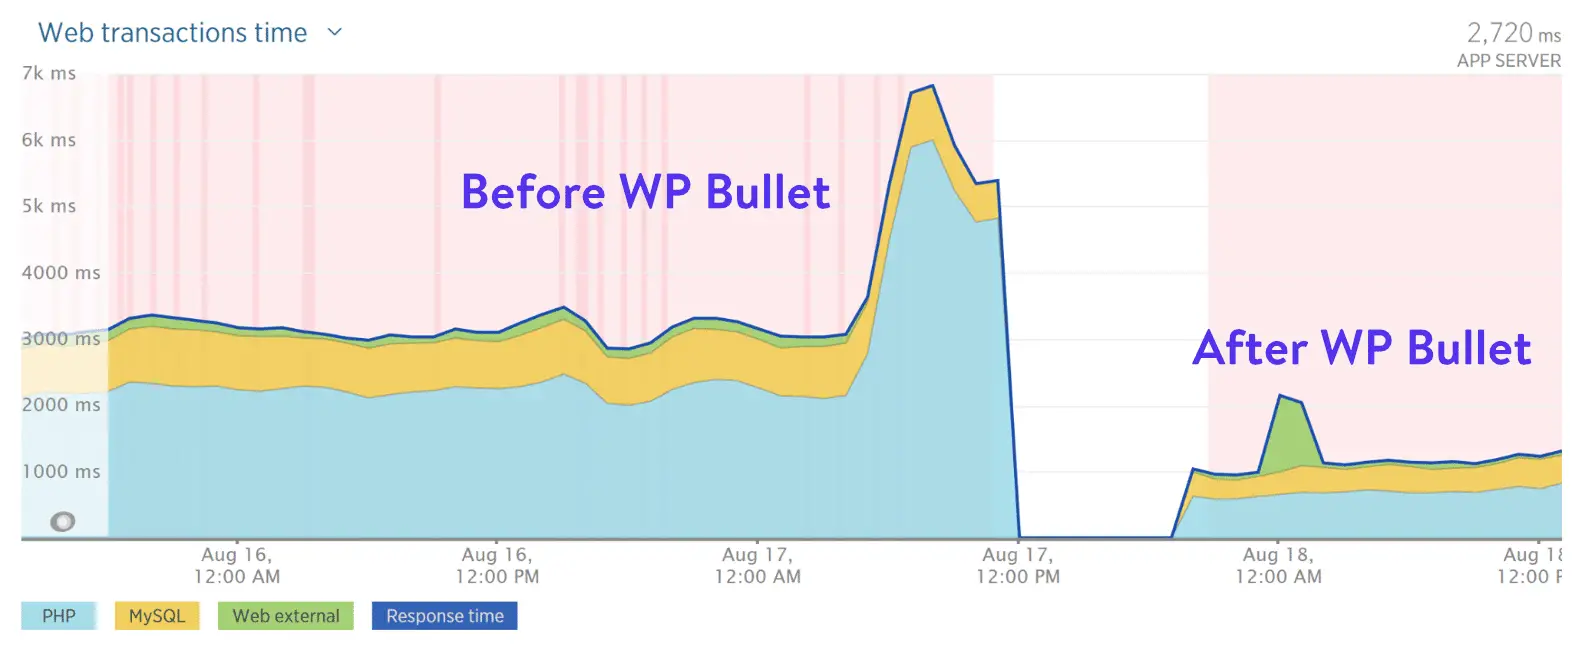 Before and After WP Bullet" width="1572" height="647" srcset="http://webypress.fr/wp-content/uploads/2019/08/1566286023_160_Comment-accelerer-votre-site-WordPress-Guide-Ultimate-2019.png 1572w, https://kinsta.com/wp-content/uploads/2018/07/before-after-wp-bullet-300x123.png 300w, https://kinsta.com/wp-content/uploads/2018/07/before-after-wp-bullet-768x316.png 768w, https://kinsta.com/wp-content/uploads/2018/07/before-after-wp-bullet-1024x421.png 1024w, https://kinsta.com/wp-content/uploads/2018/07/before-after-wp-bullet-610x251.png 610w" sizes="(max-width: 1572px) 100vw, 1572px